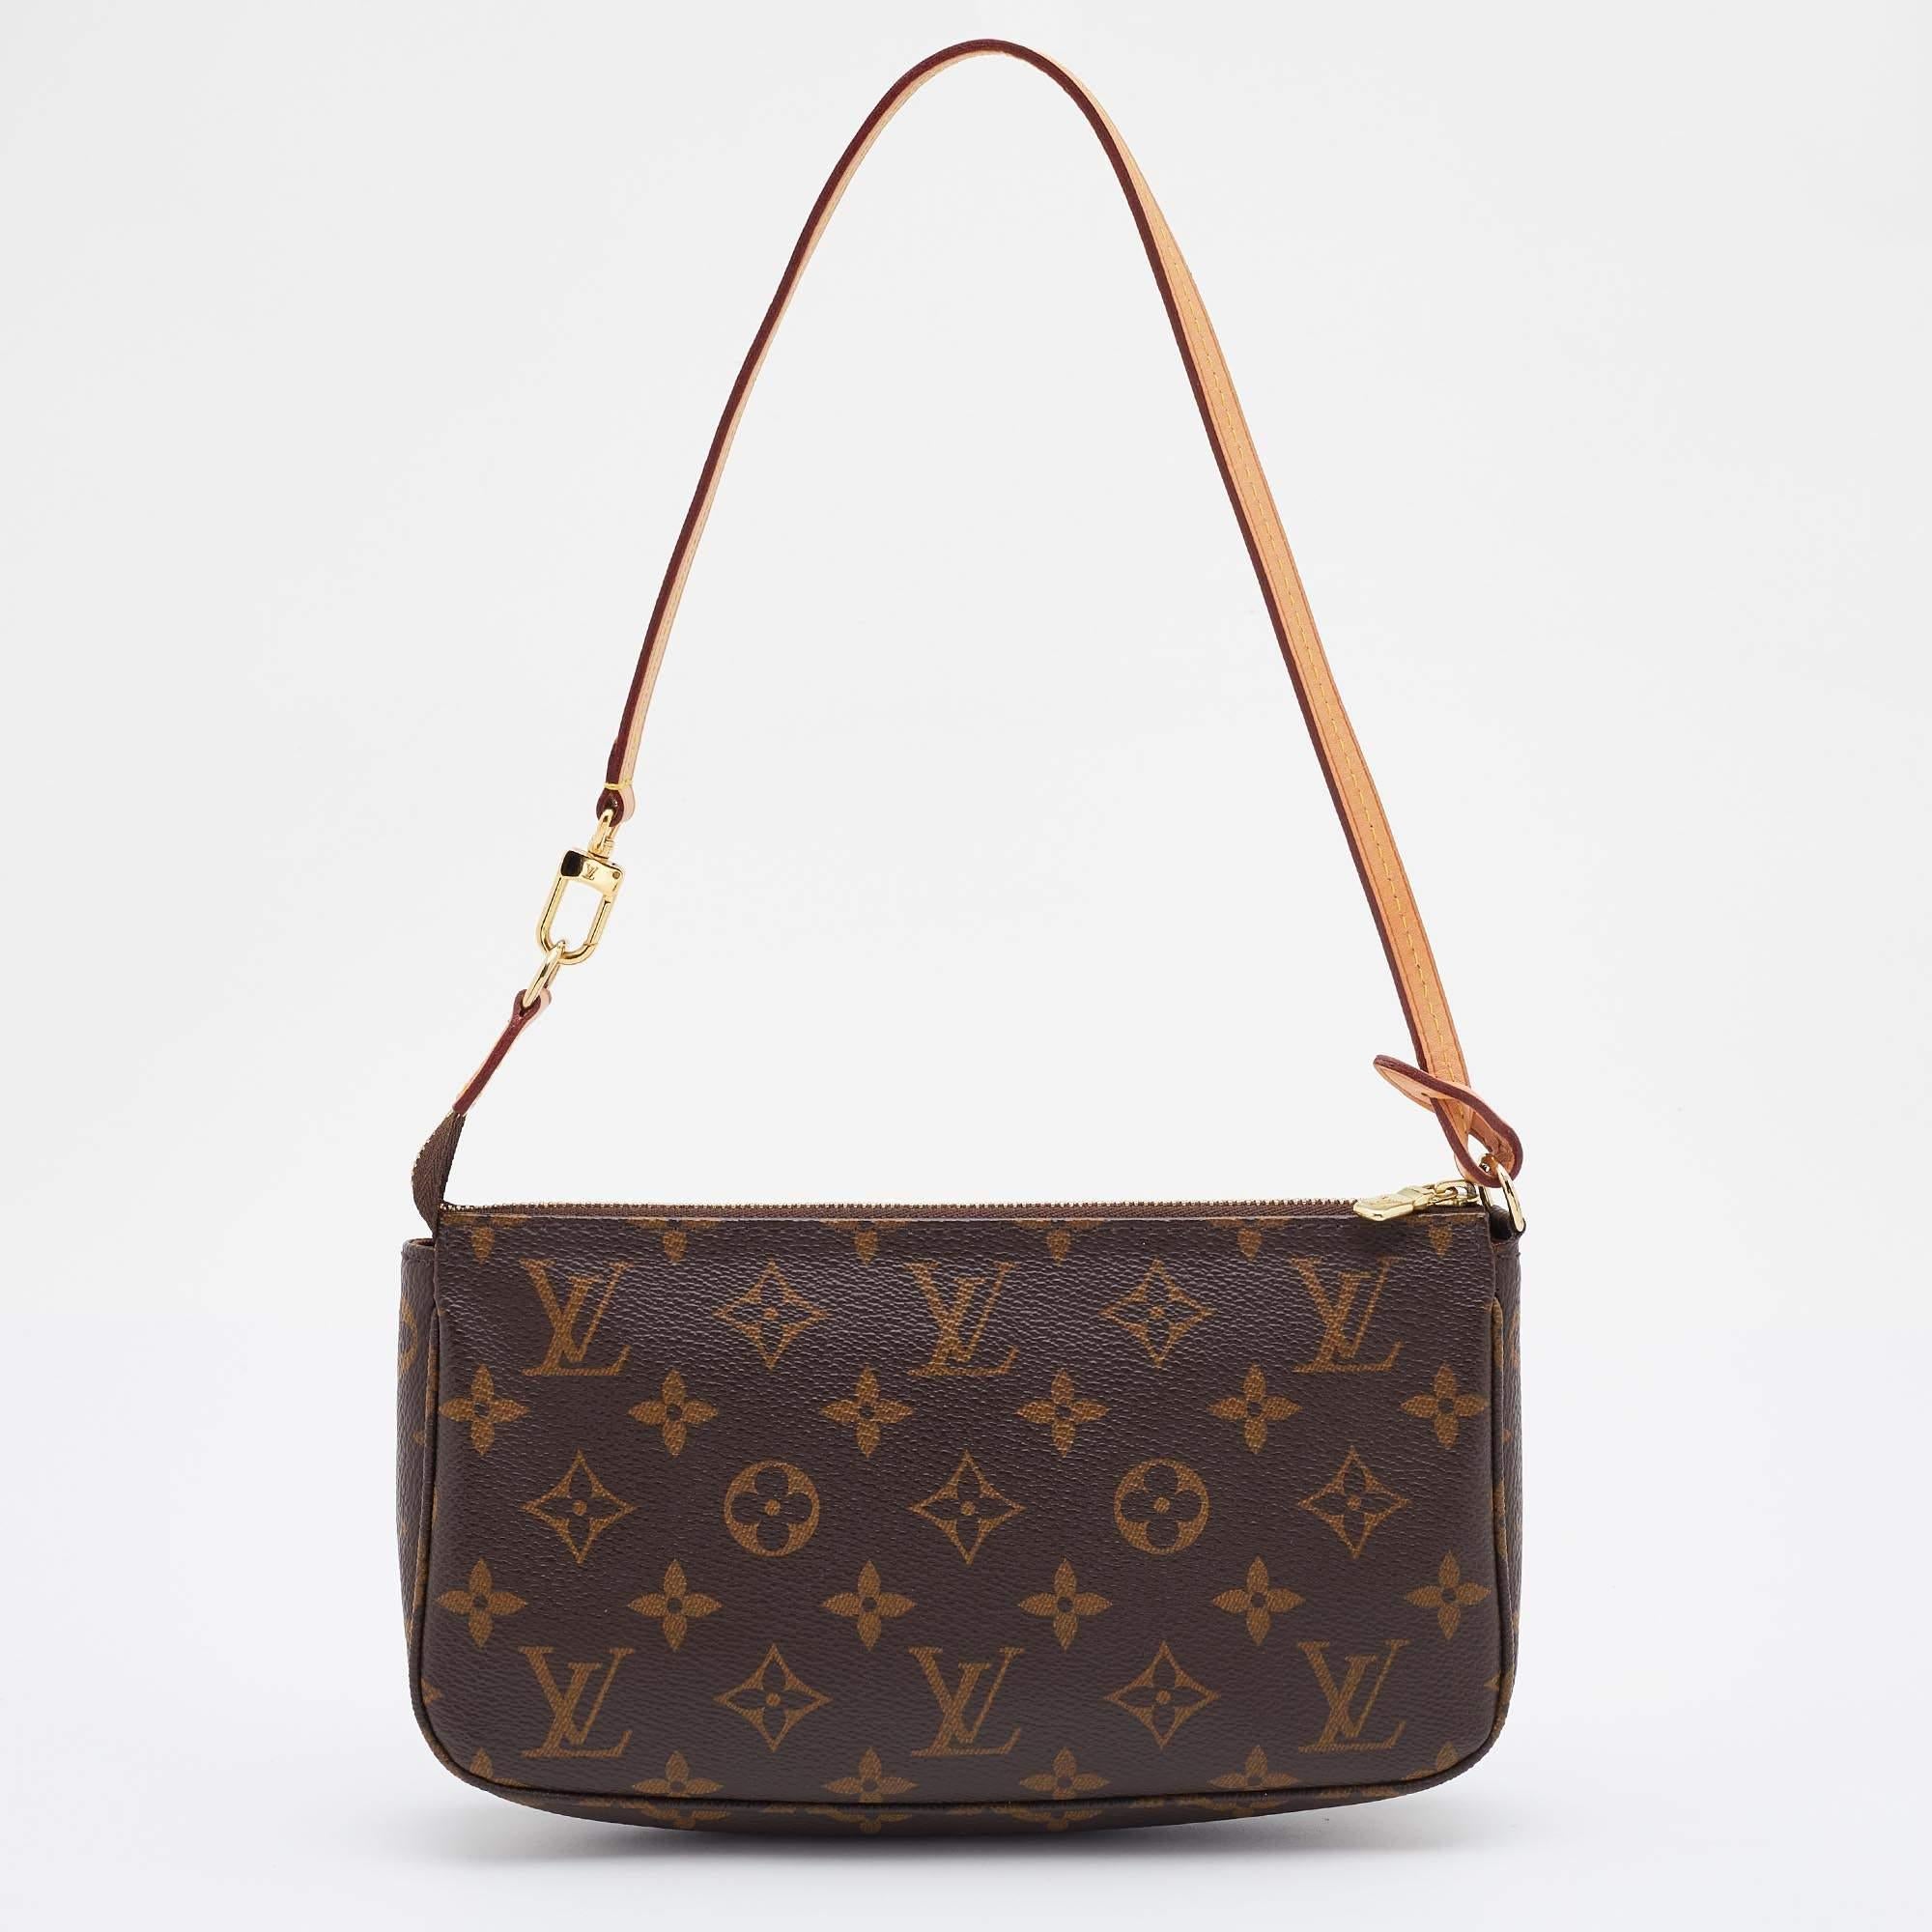 With this bag, Louis Vuitton introduces a beautiful piece of addition for the smart woman. An ideal brown bag that calls out to the modern woman in you. Tailored to a smooth finish, this monogram canvas bag adds oodles of sophistication to your